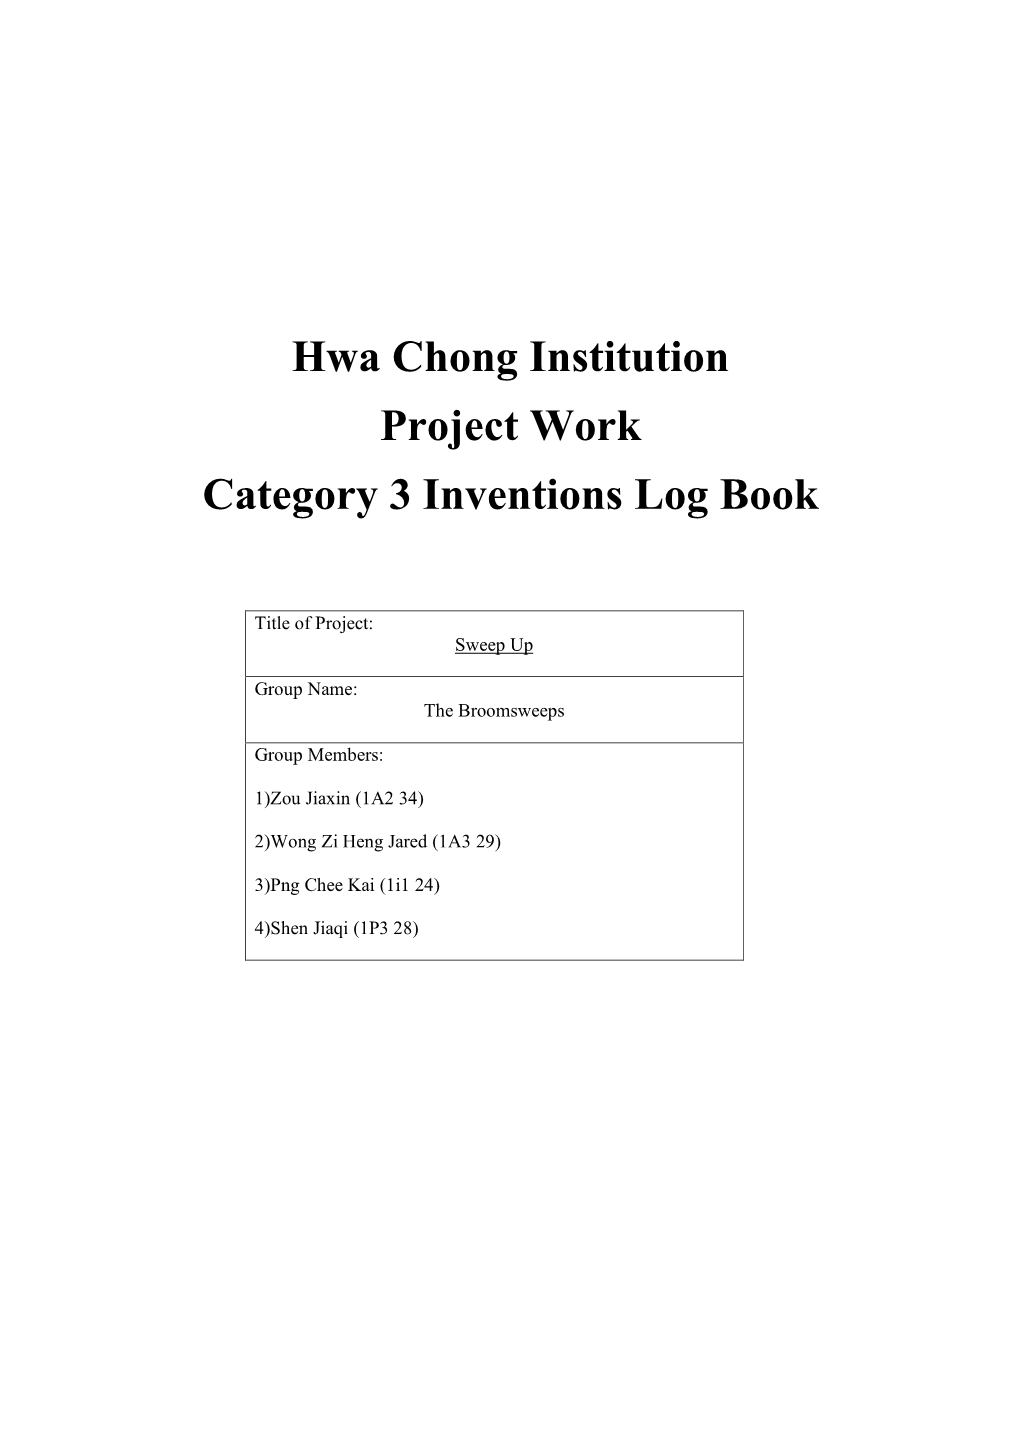 Hwa Chong Institution Project Work Category 3 Inventions Log Book